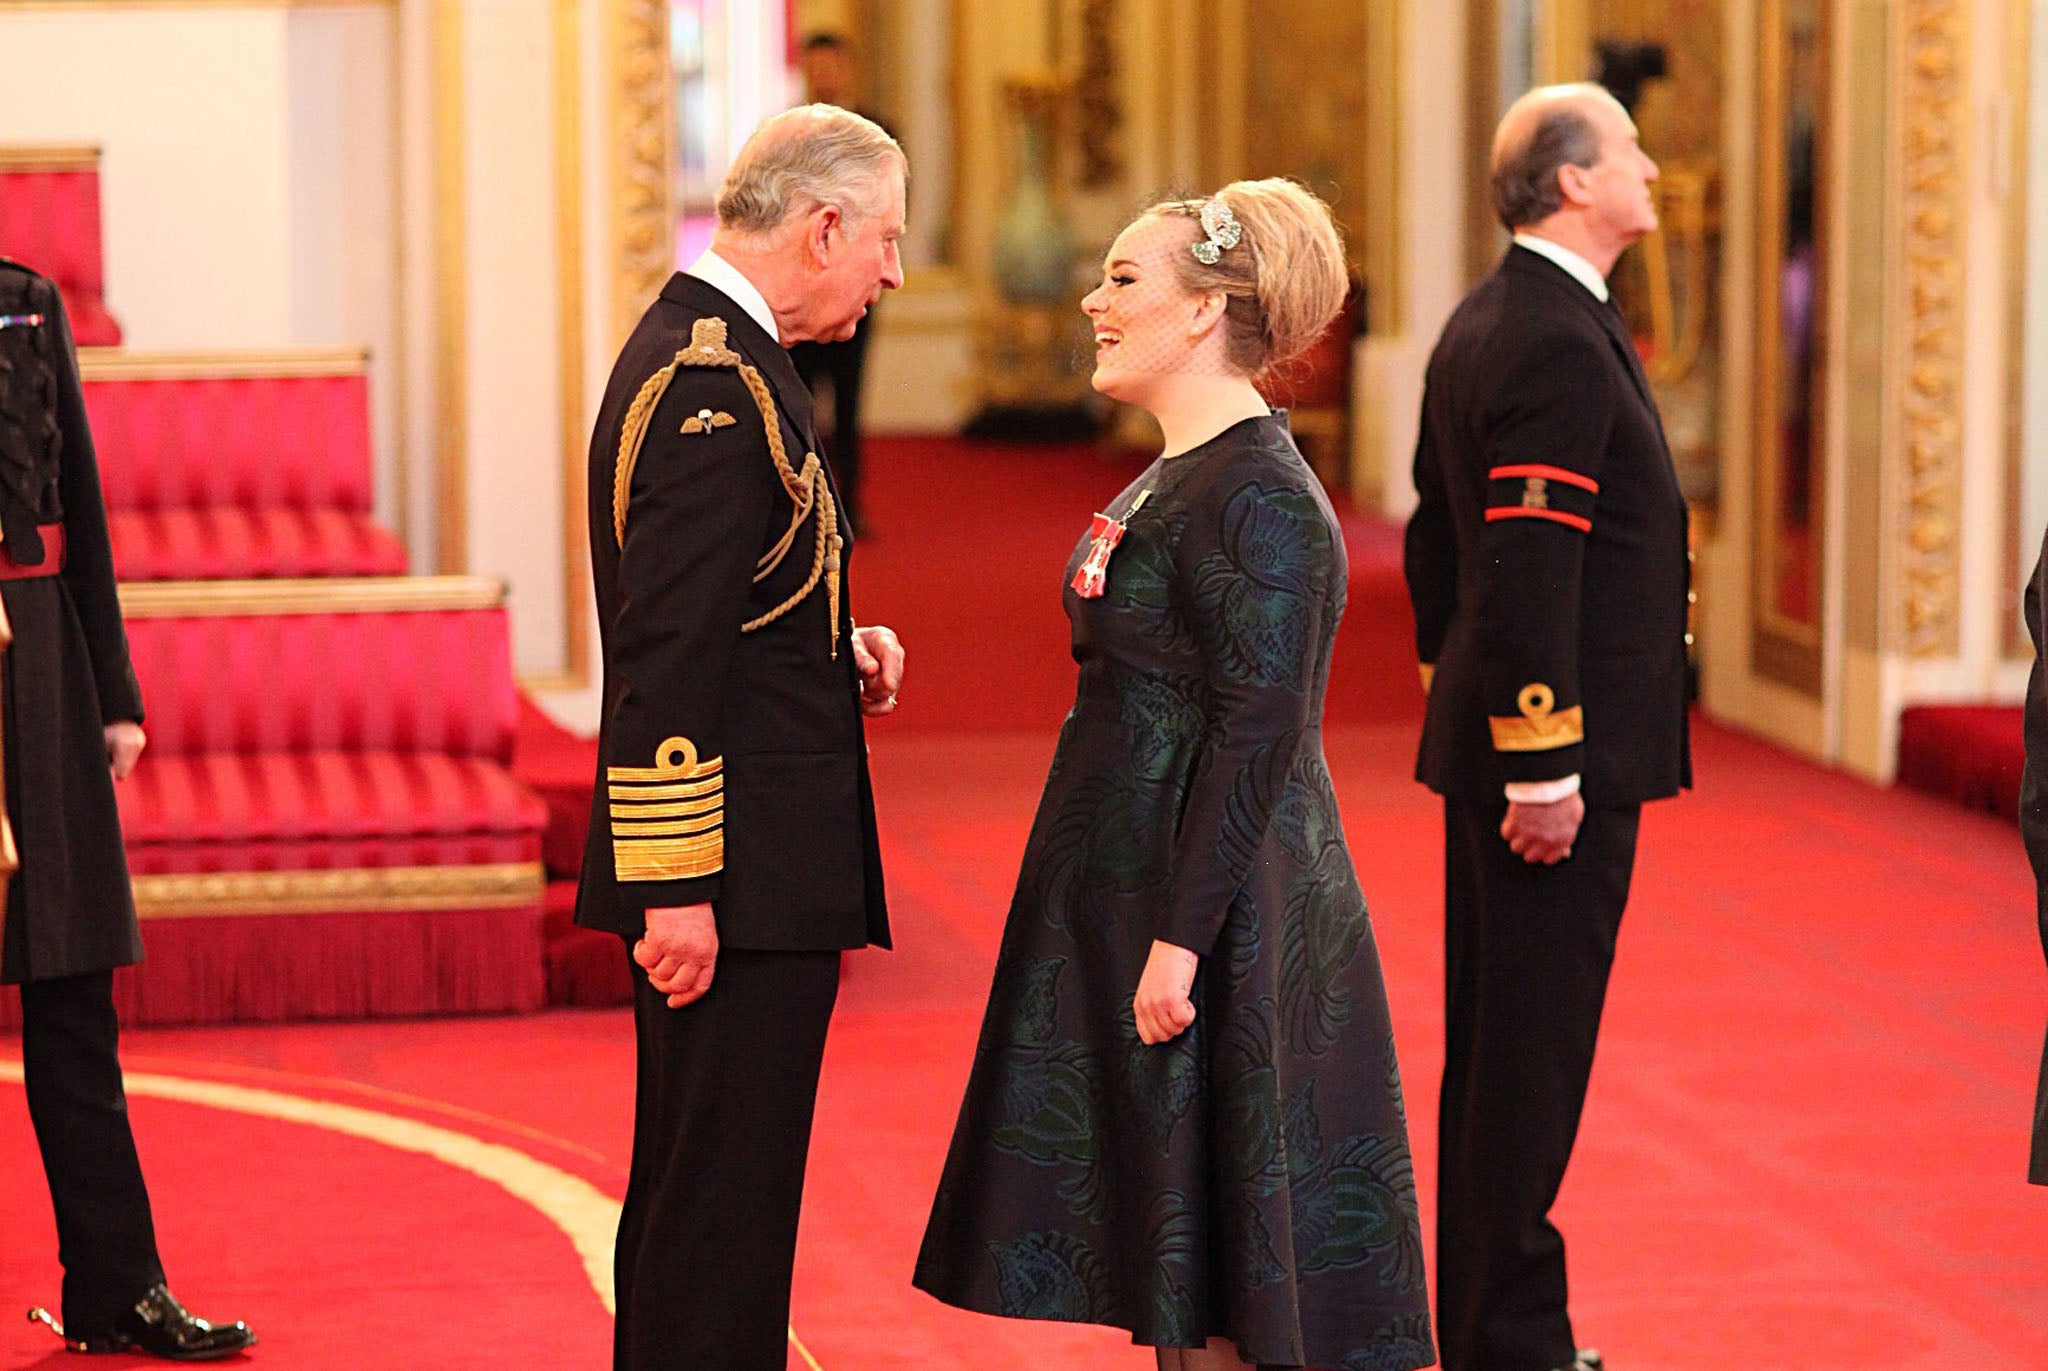 The “Someone Like You” singer beamed as she received her Most Excellent Order of the British Empire from Prince Charles at Buckingham Palace this morning, making her full title Miss Adele Adkins MBE